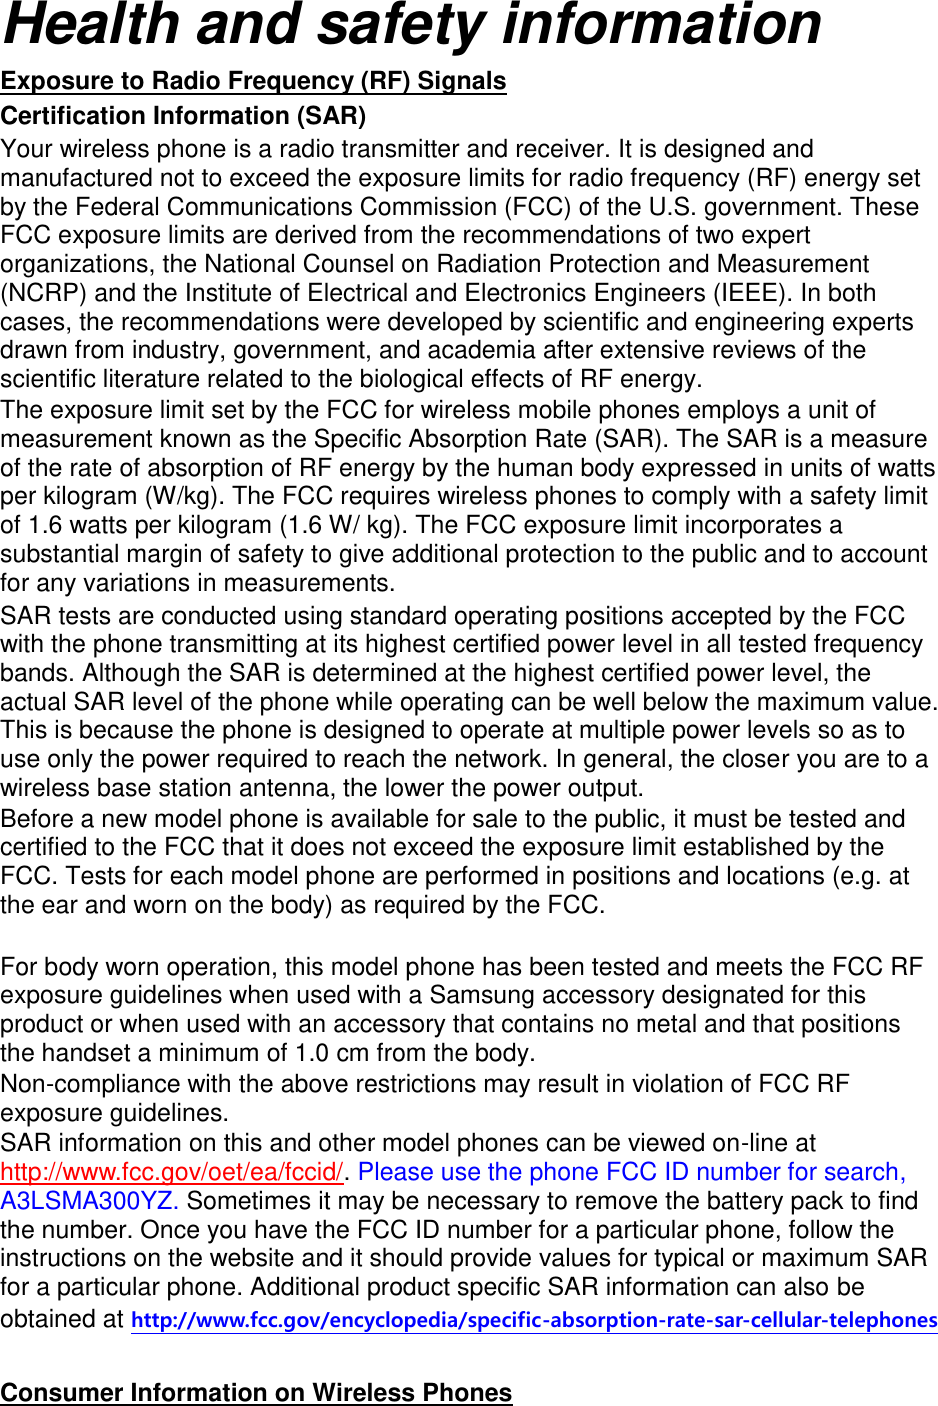 Health and safety information Exposure to Radio Frequency (RF) Signals Certification Information (SAR) Your wireless phone is a radio transmitter and receiver. It is designed and manufactured not to exceed the exposure limits for radio frequency (RF) energy set by the Federal Communications Commission (FCC) of the U.S. government. These FCC exposure limits are derived from the recommendations of two expert organizations, the National Counsel on Radiation Protection and Measurement (NCRP) and the Institute of Electrical and Electronics Engineers (IEEE). In both cases, the recommendations were developed by scientific and engineering experts drawn from industry, government, and academia after extensive reviews of the scientific literature related to the biological effects of RF energy. The exposure limit set by the FCC for wireless mobile phones employs a unit of measurement known as the Specific Absorption Rate (SAR). The SAR is a measure of the rate of absorption of RF energy by the human body expressed in units of watts per kilogram (W/kg). The FCC requires wireless phones to comply with a safety limit of 1.6 watts per kilogram (1.6 W/ kg). The FCC exposure limit incorporates a substantial margin of safety to give additional protection to the public and to account for any variations in measurements. SAR tests are conducted using standard operating positions accepted by the FCC with the phone transmitting at its highest certified power level in all tested frequency bands. Although the SAR is determined at the highest certified power level, the actual SAR level of the phone while operating can be well below the maximum value. This is because the phone is designed to operate at multiple power levels so as to use only the power required to reach the network. In general, the closer you are to a wireless base station antenna, the lower the power output. Before a new model phone is available for sale to the public, it must be tested and certified to the FCC that it does not exceed the exposure limit established by the FCC. Tests for each model phone are performed in positions and locations (e.g. at the ear and worn on the body) as required by the FCC.      For body worn operation, this model phone has been tested and meets the FCC RF exposure guidelines when used with a Samsung accessory designated for this product or when used with an accessory that contains no metal and that positions the handset a minimum of 1.0 cm from the body.   Non-compliance with the above restrictions may result in violation of FCC RF exposure guidelines. SAR information on this and other model phones can be viewed on-line at http://www.fcc.gov/oet/ea/fccid/. Please use the phone FCC ID number for search, A3LSMA300YZ. Sometimes it may be necessary to remove the battery pack to find the number. Once you have the FCC ID number for a particular phone, follow the instructions on the website and it should provide values for typical or maximum SAR for a particular phone. Additional product specific SAR information can also be obtained at http://www.fcc.gov/encyclopedia/specific-absorption-rate-sar-cellular-telephones  Consumer Information on Wireless Phones 